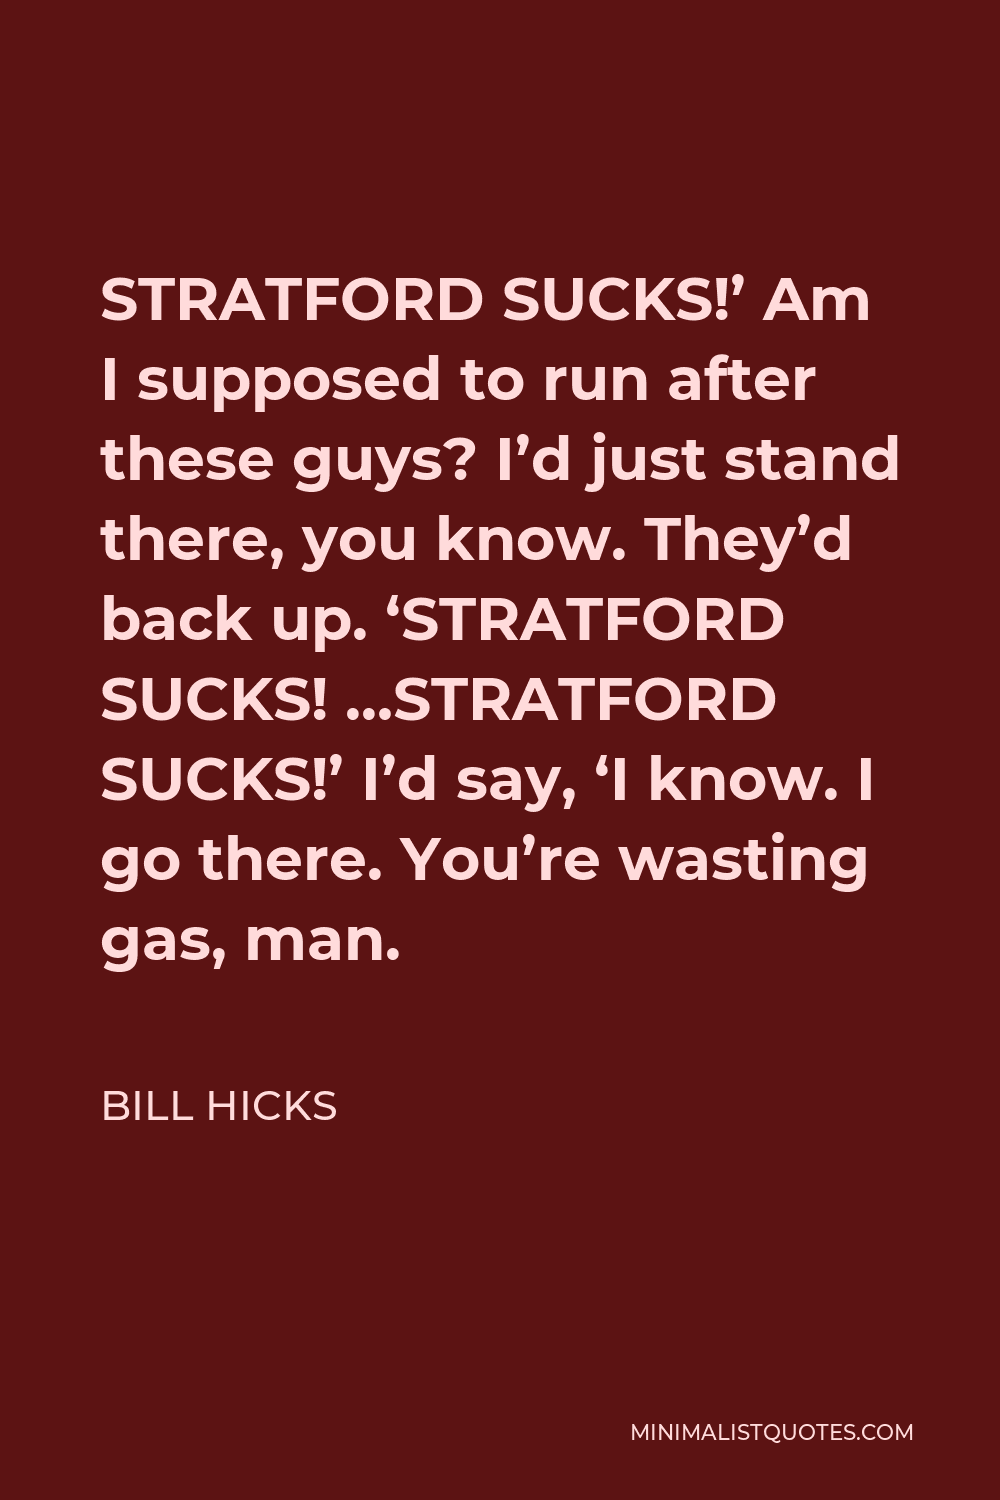 Bill Hicks Quote - STRATFORD SUCKS!’ Am I supposed to run after these guys? I’d just stand there, you know. They’d back up. ‘STRATFORD SUCKS! …STRATFORD SUCKS!’ I’d say, ‘I know. I go there. You’re wasting gas, man.